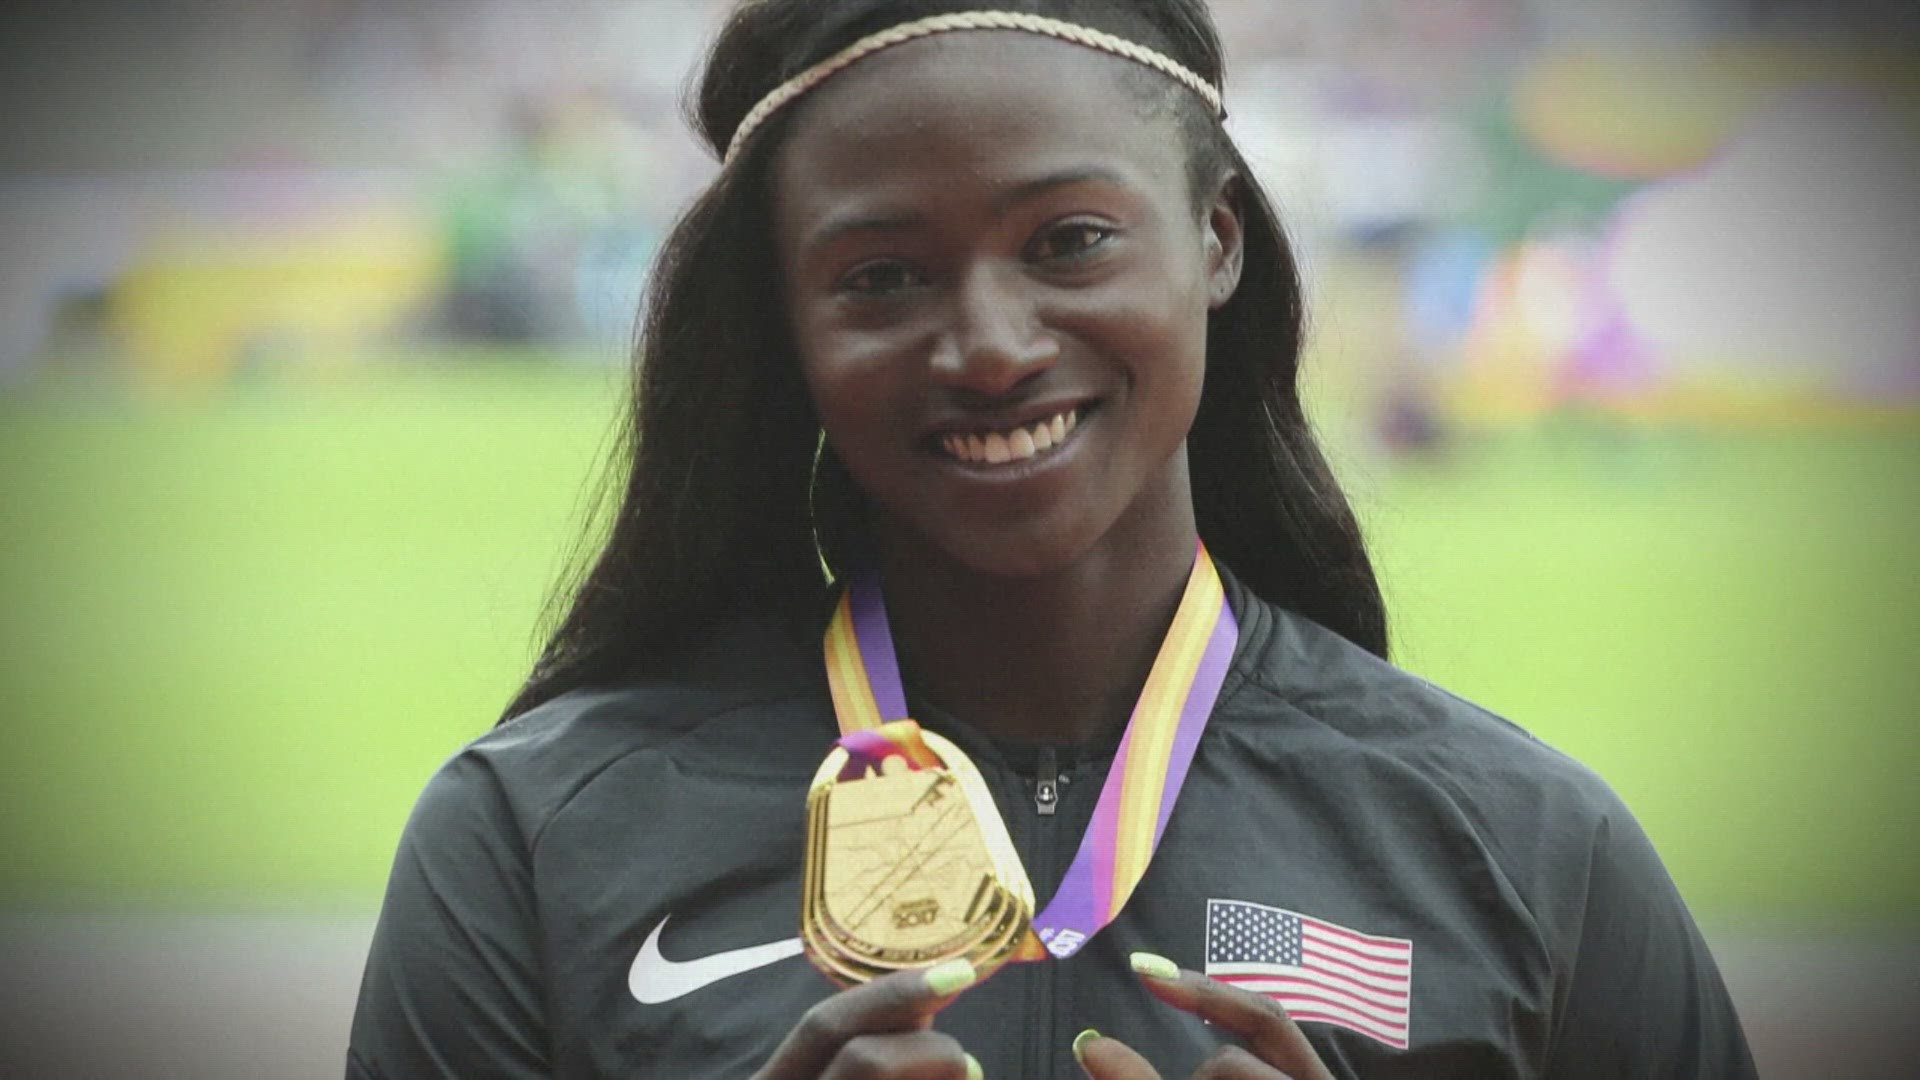 The Olympian died unexpectedly in May while eight months pregnant.